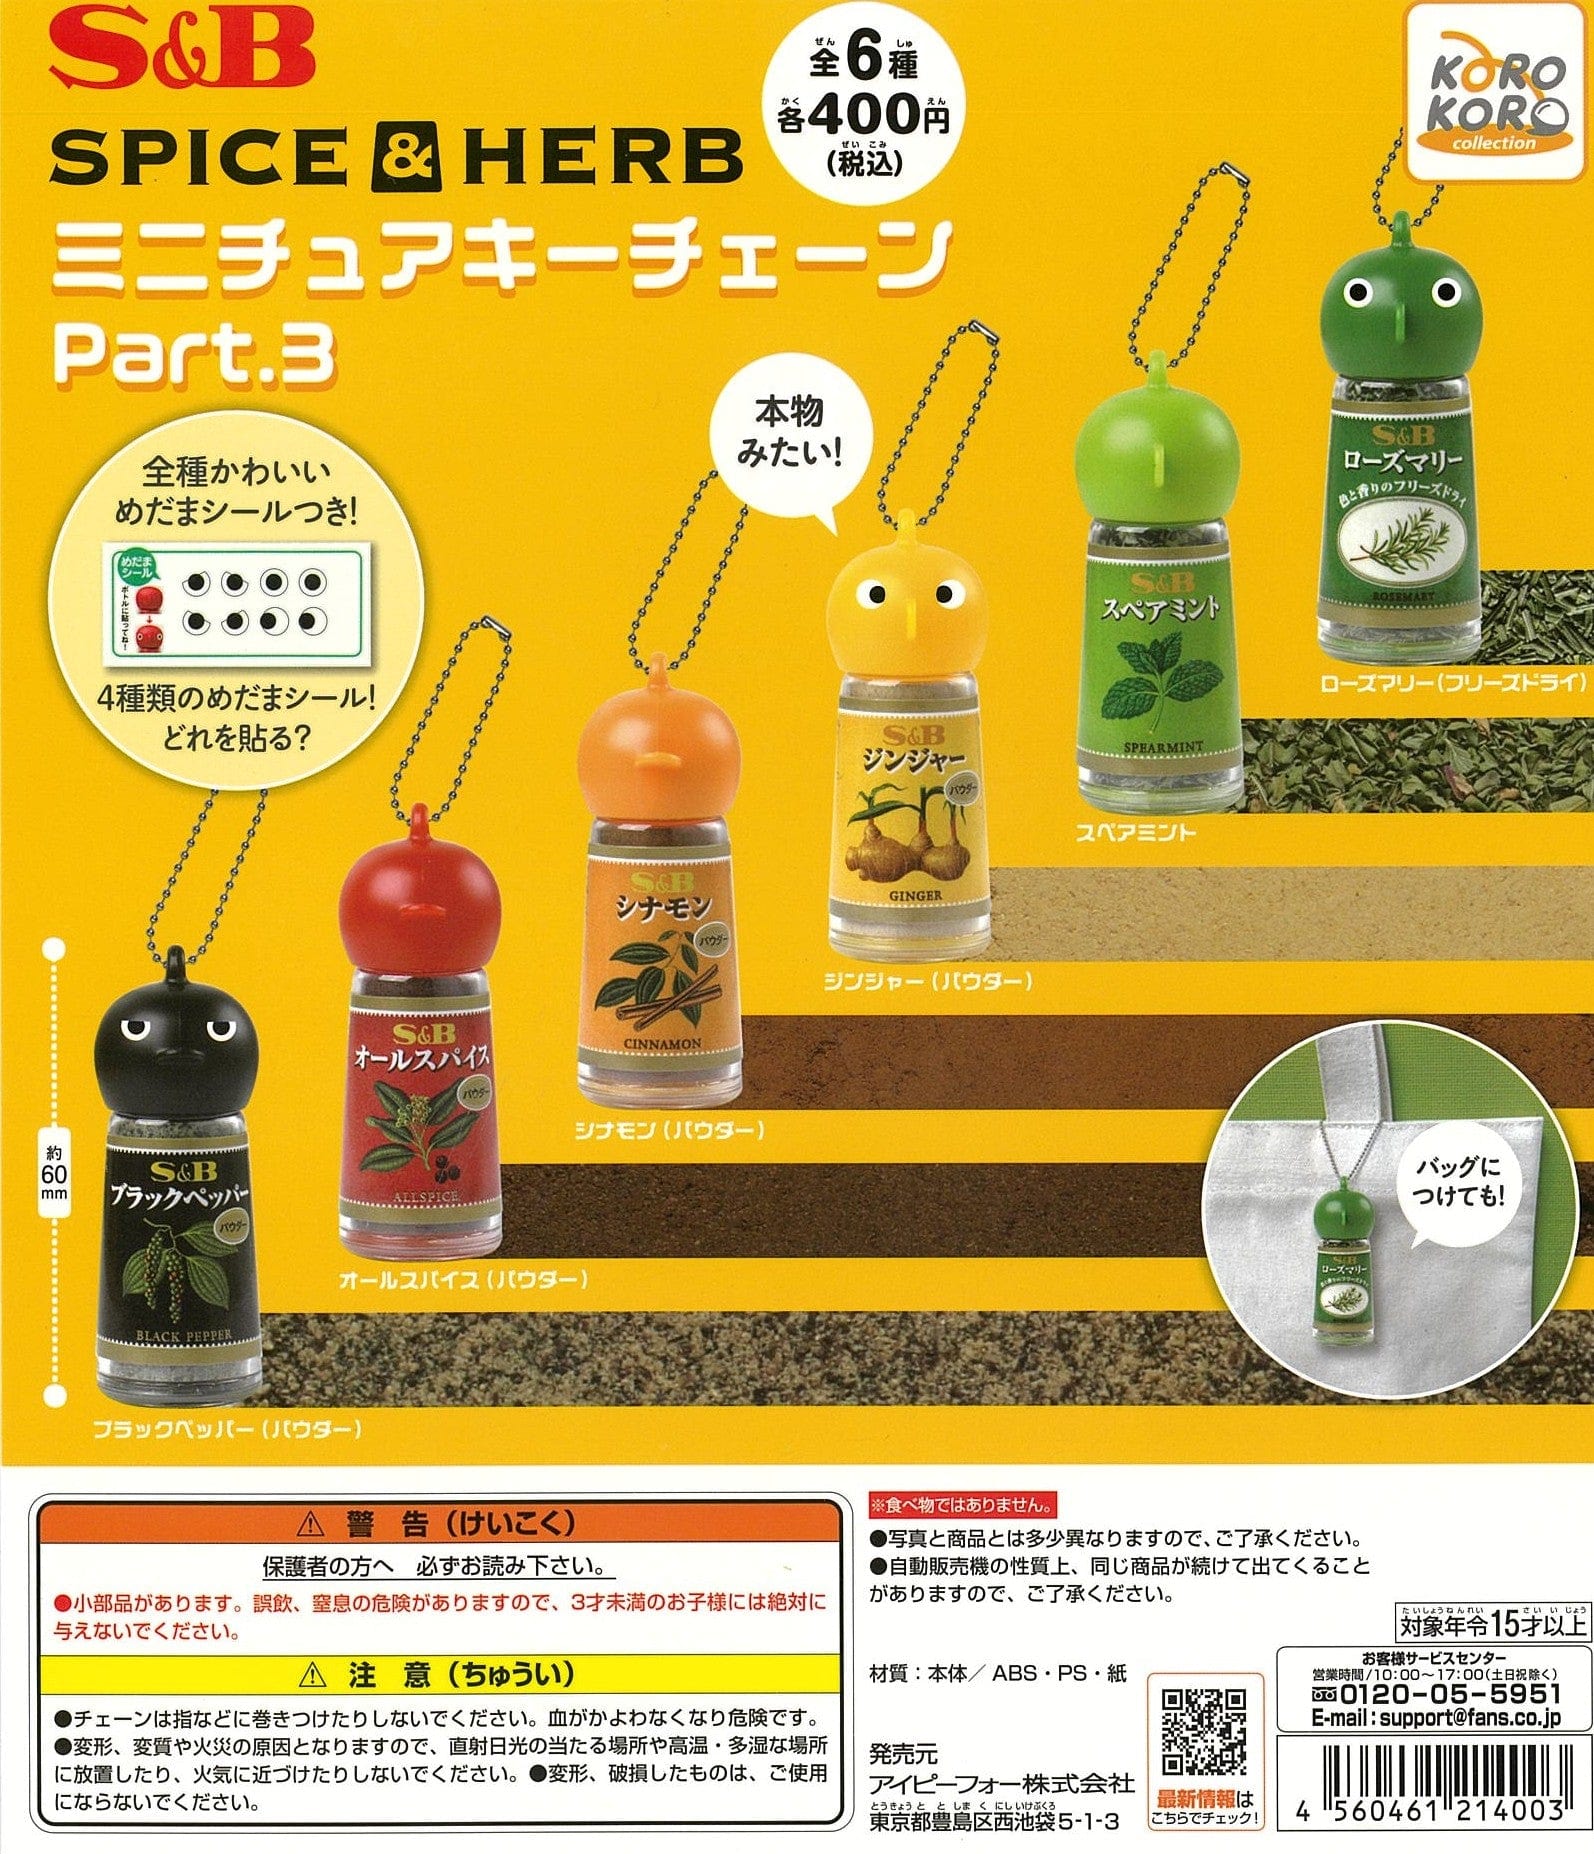 KoroKoro Collection CP2408 S&B Foods Spice & Herb Miniature Key Chain Part 3